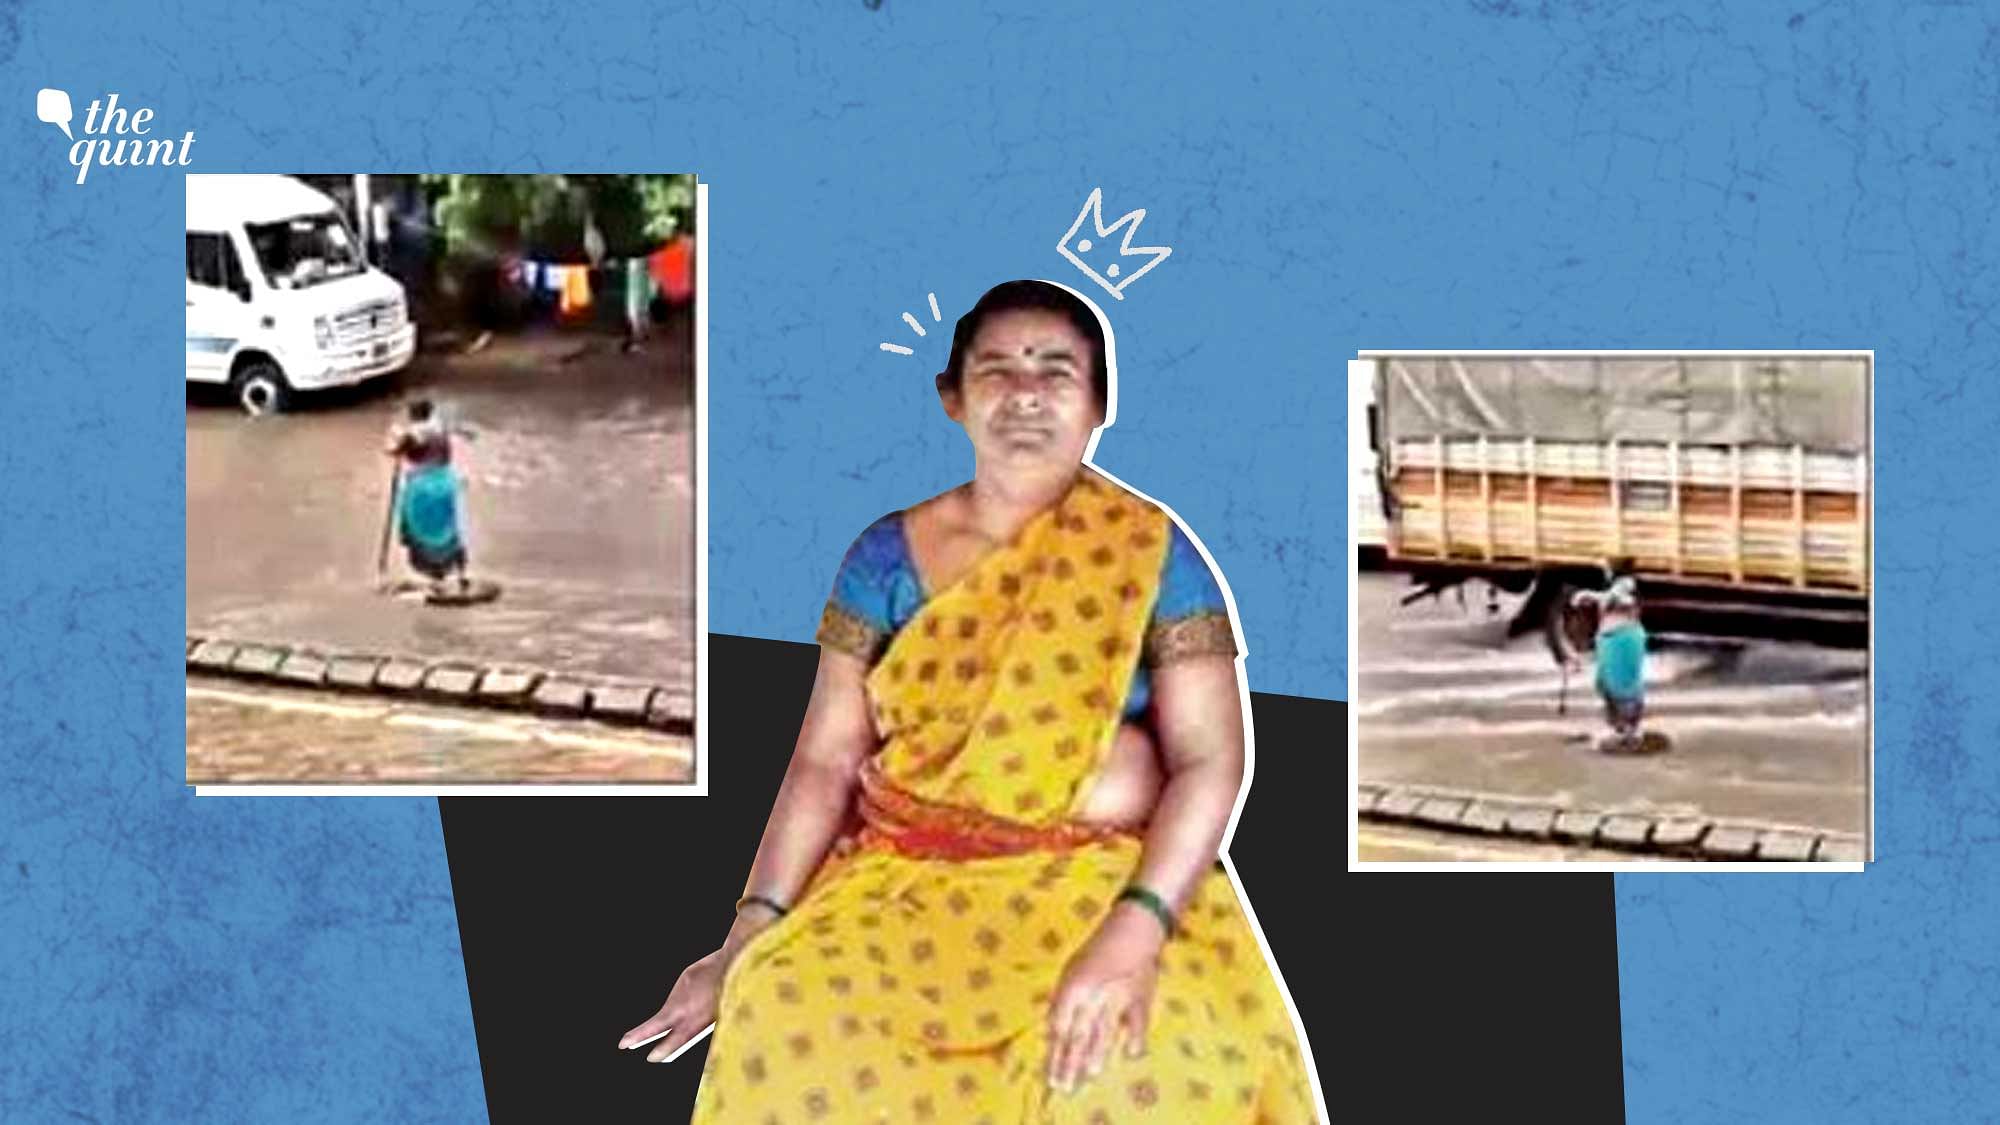 “I just did what felt right to me,” said the 50-year-old pavement dweller in south Mumbai.